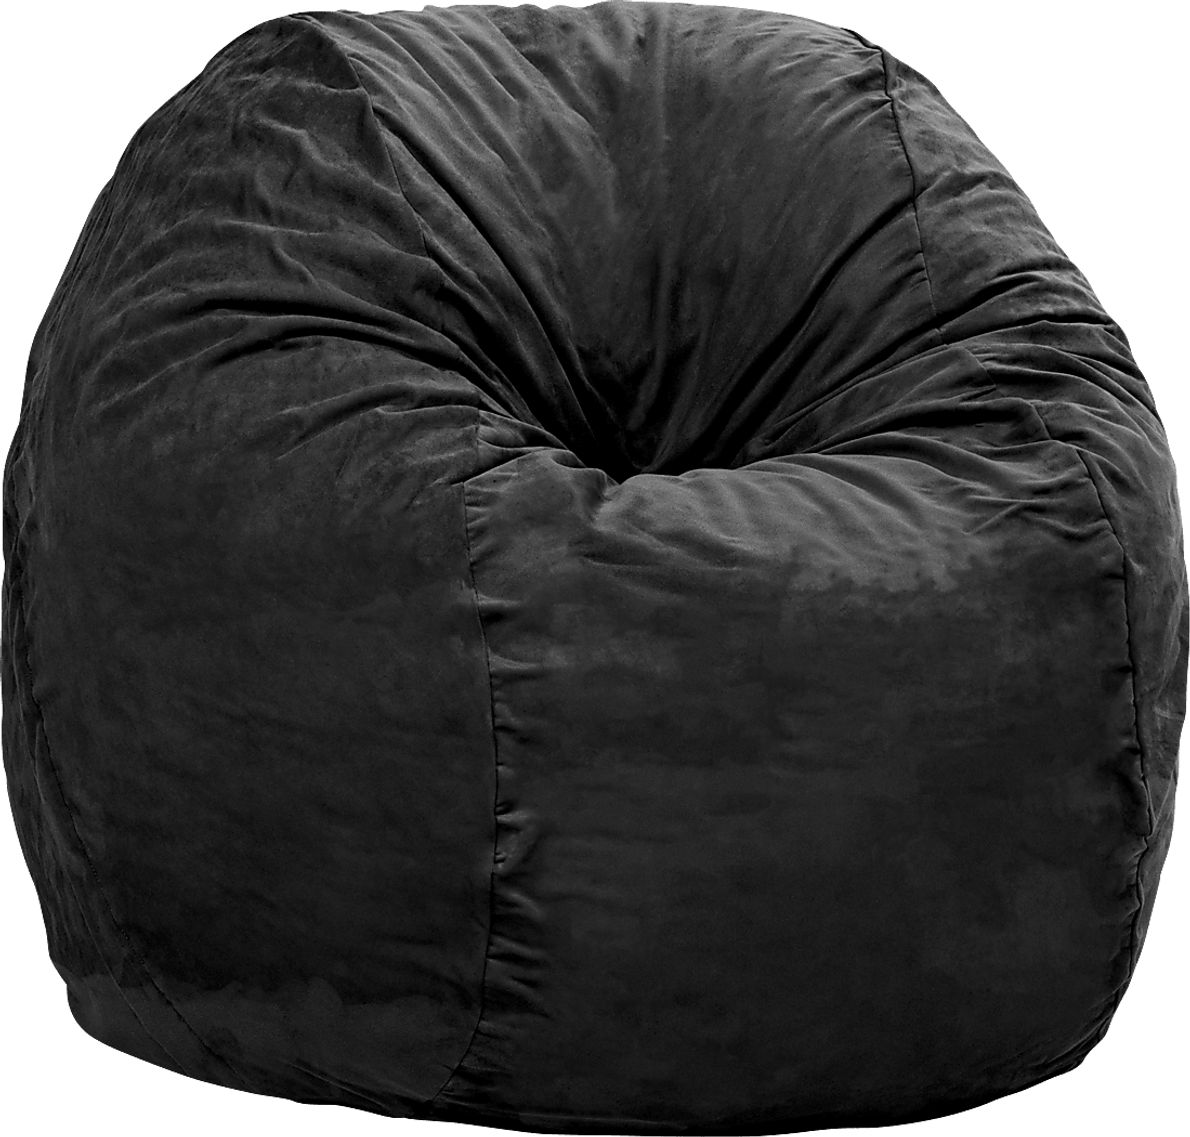 Kids Marshmellow Black Large Bean Bag Chair - Rooms To Go